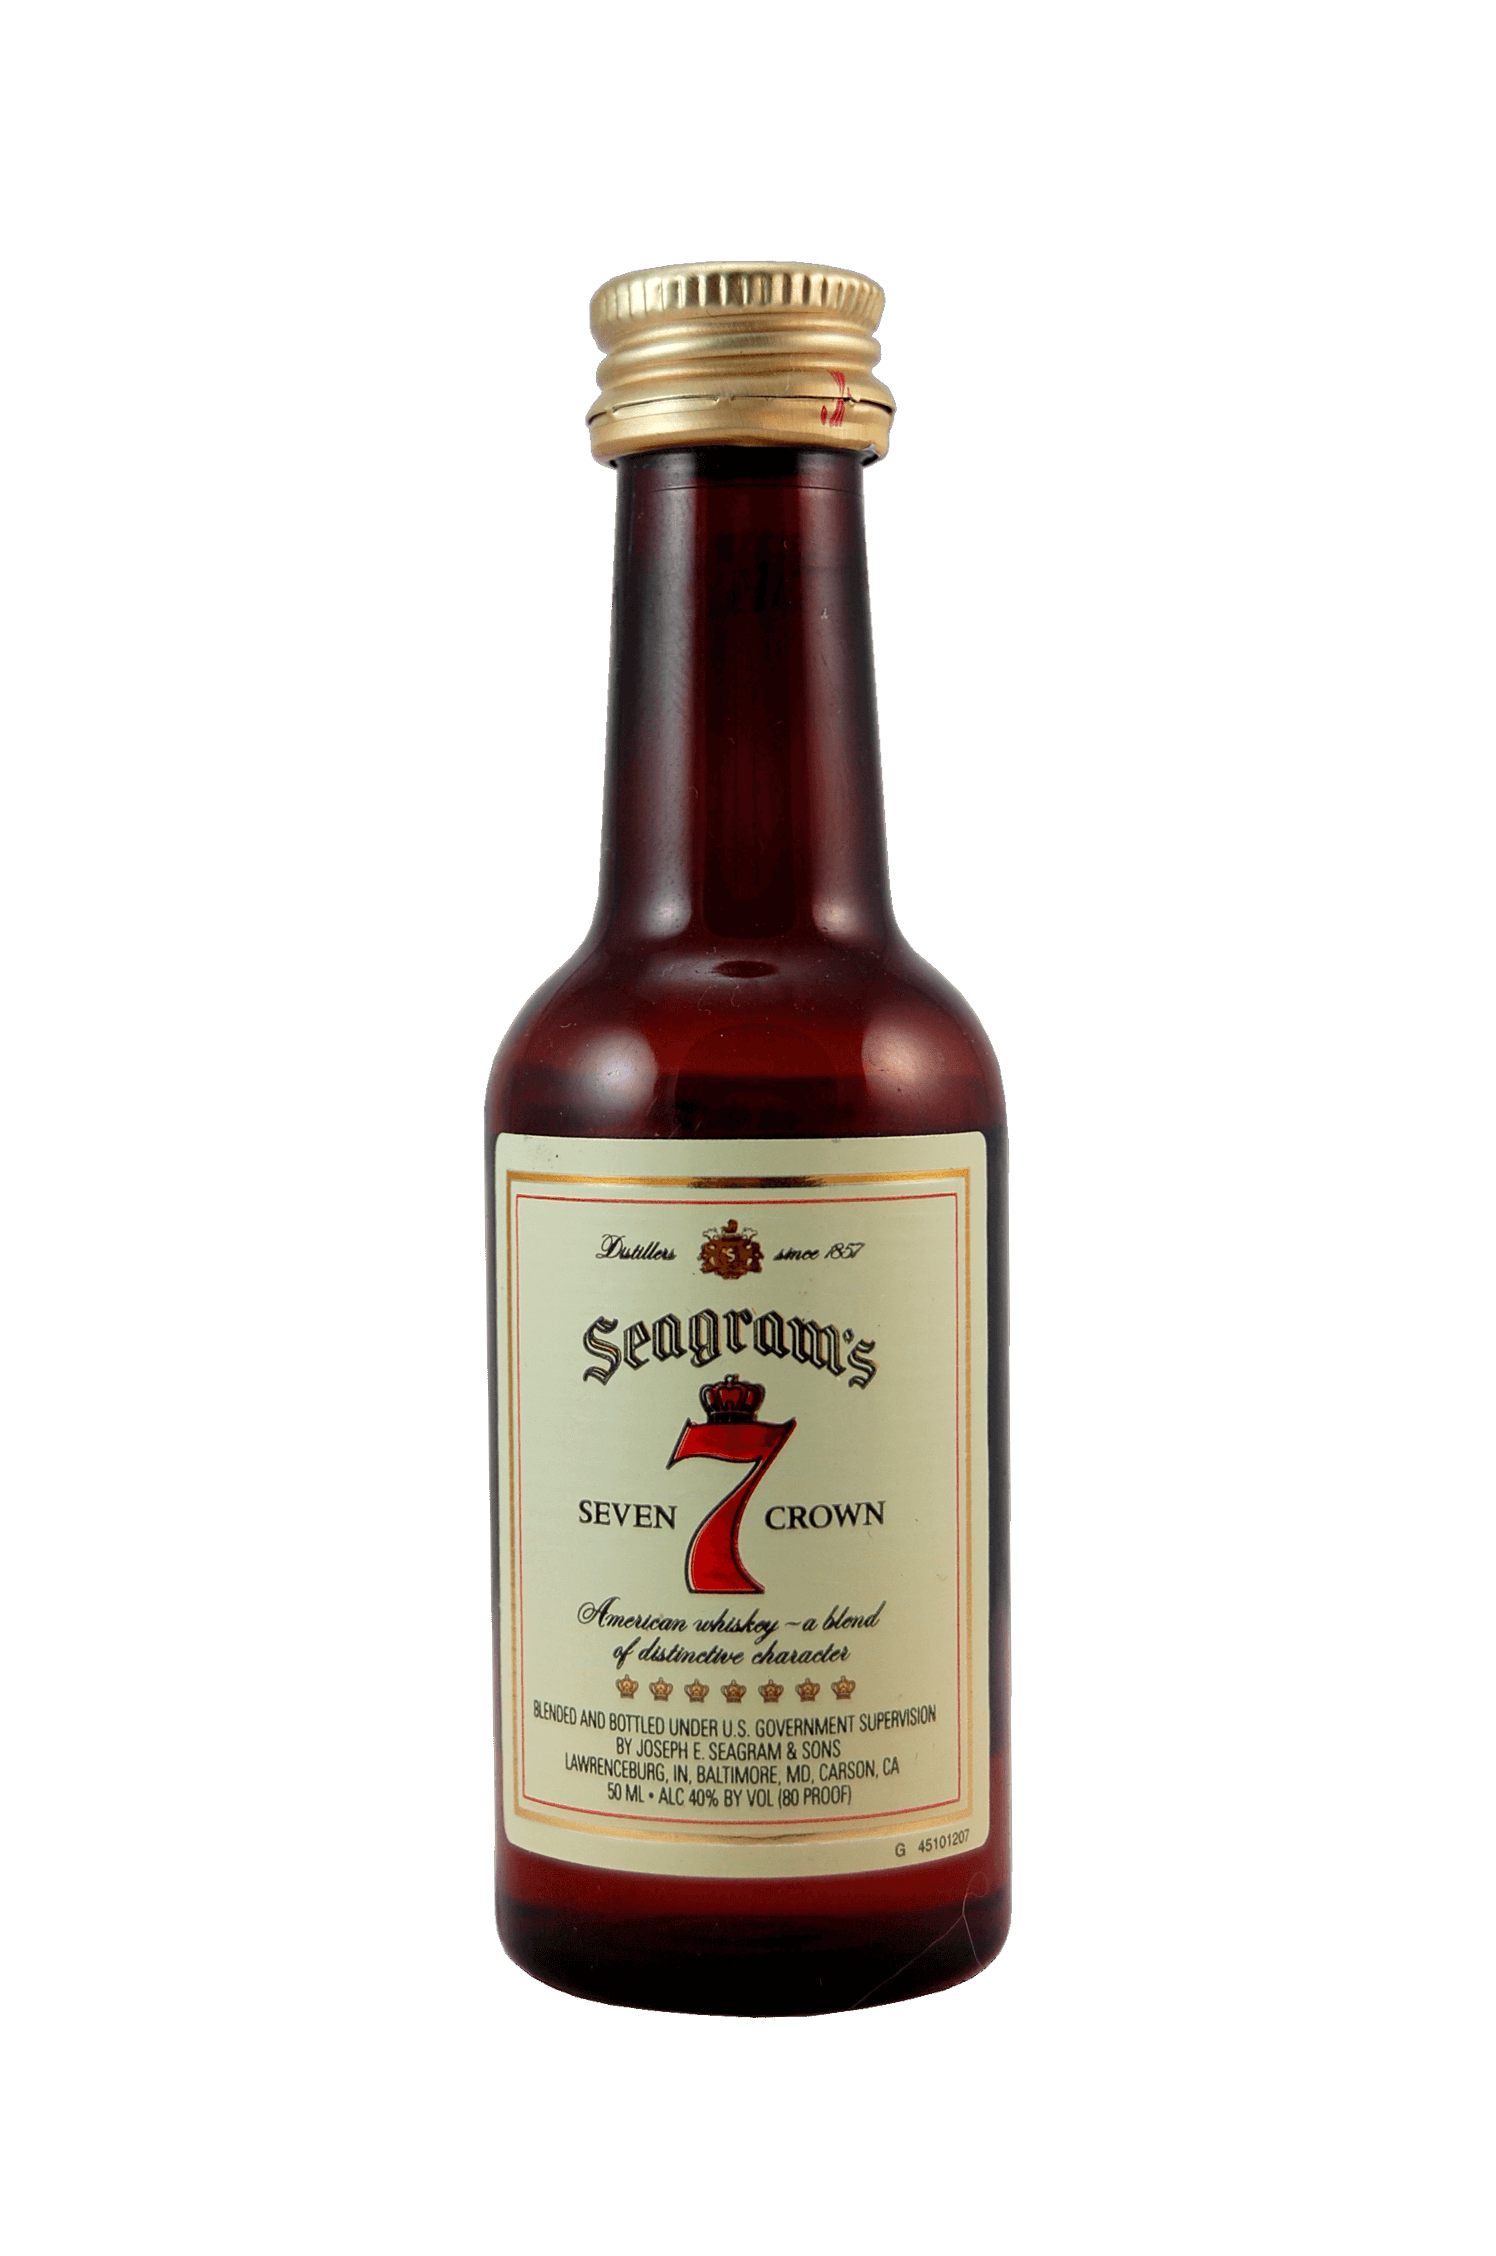 Seagram’s Seven Crown Whisky